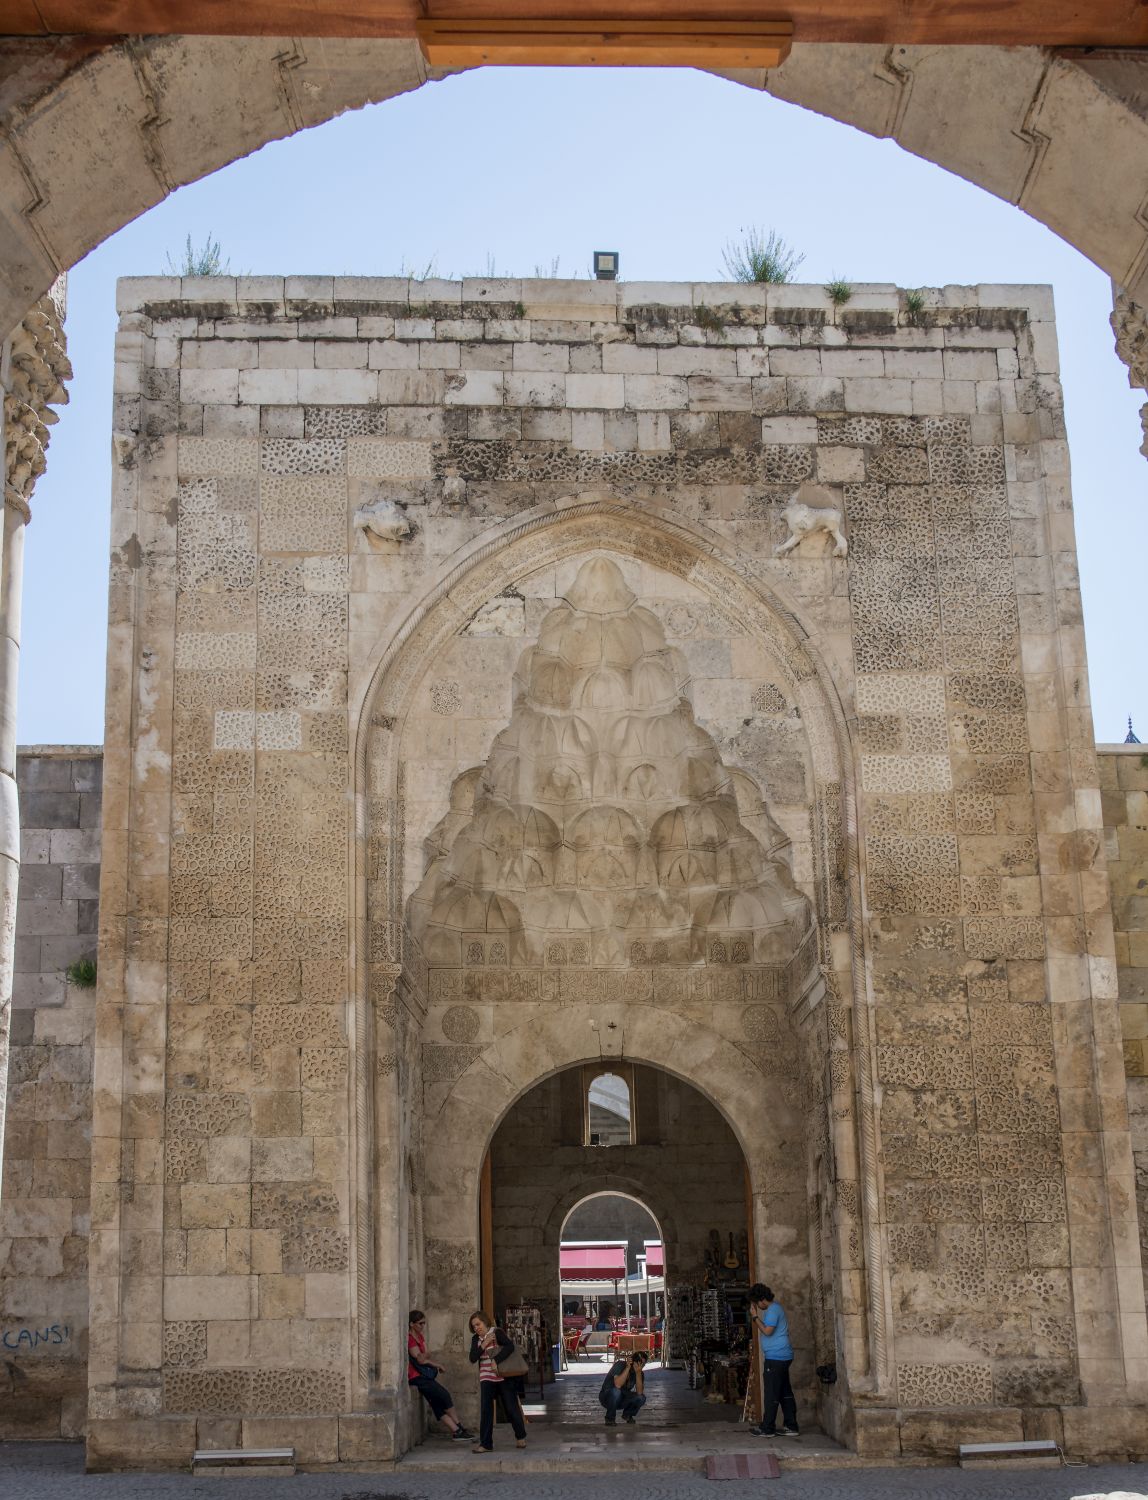 Entrance portal, viewed from within the arched portal of Cifte Minareli Medrese opposite.